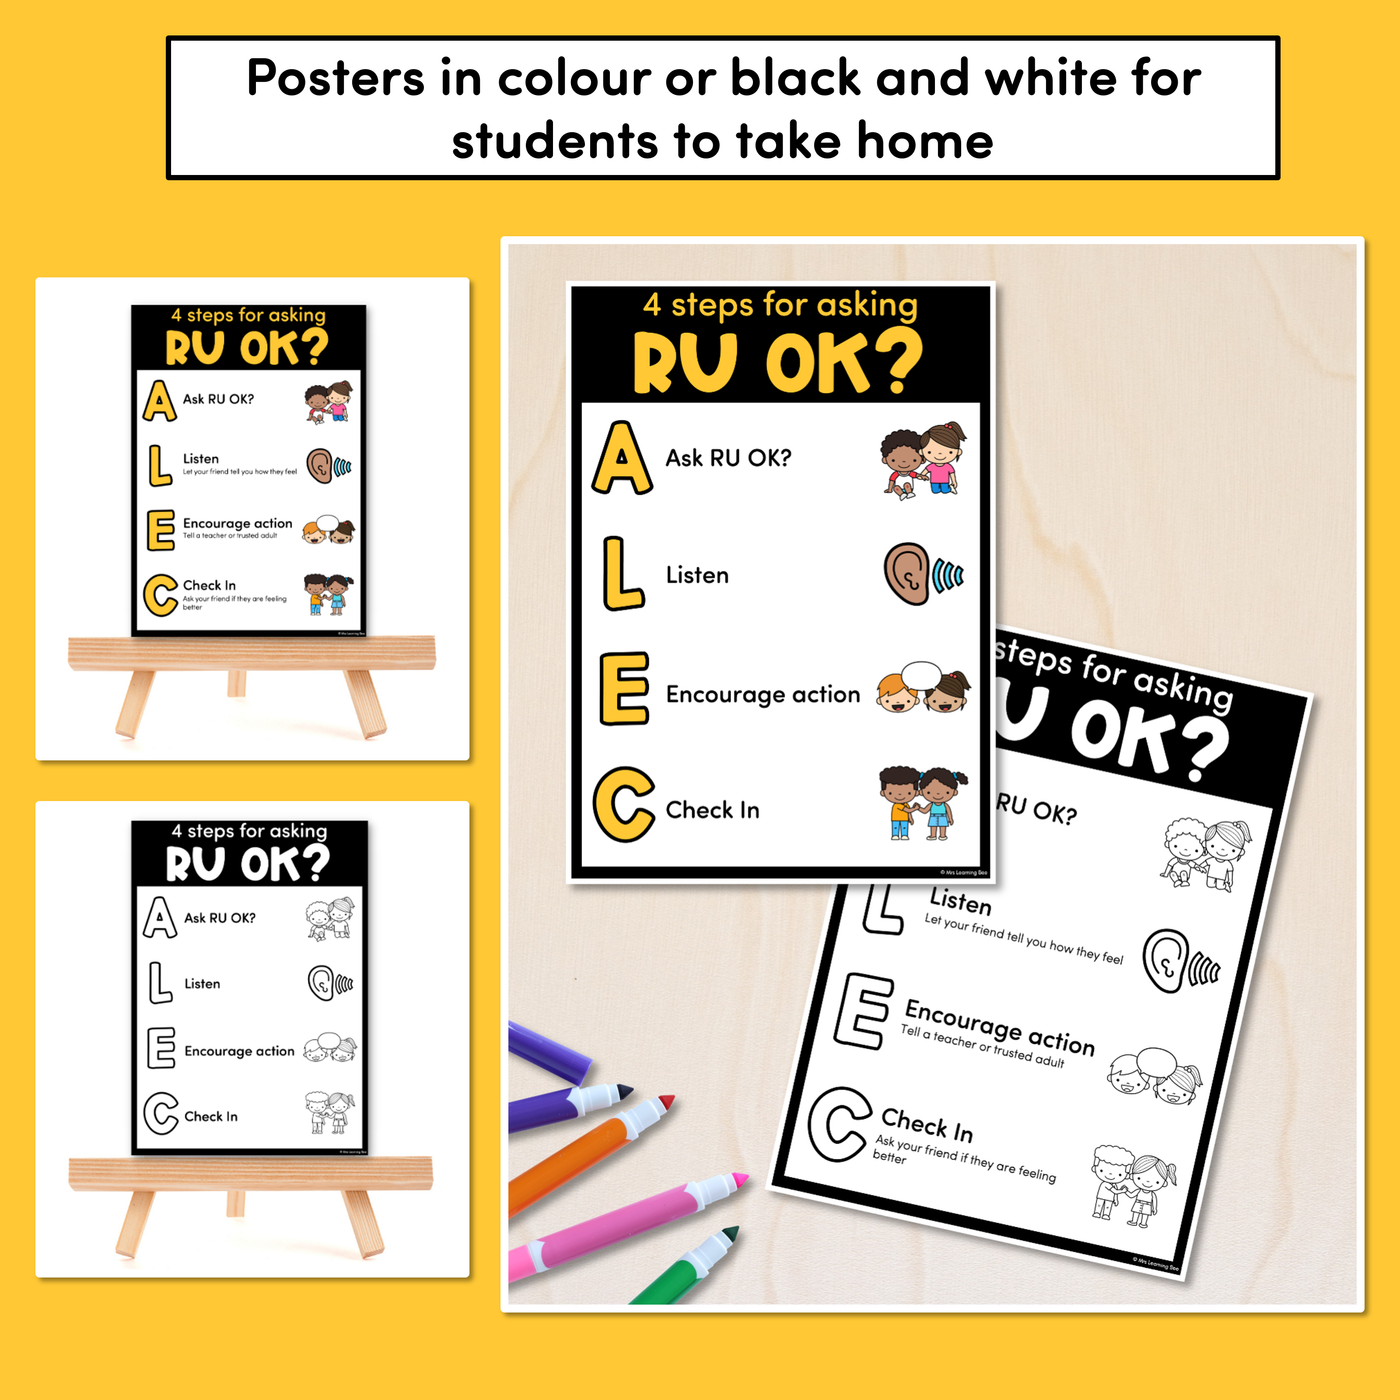 RU OK? Day Posters and Brainstorming Templates